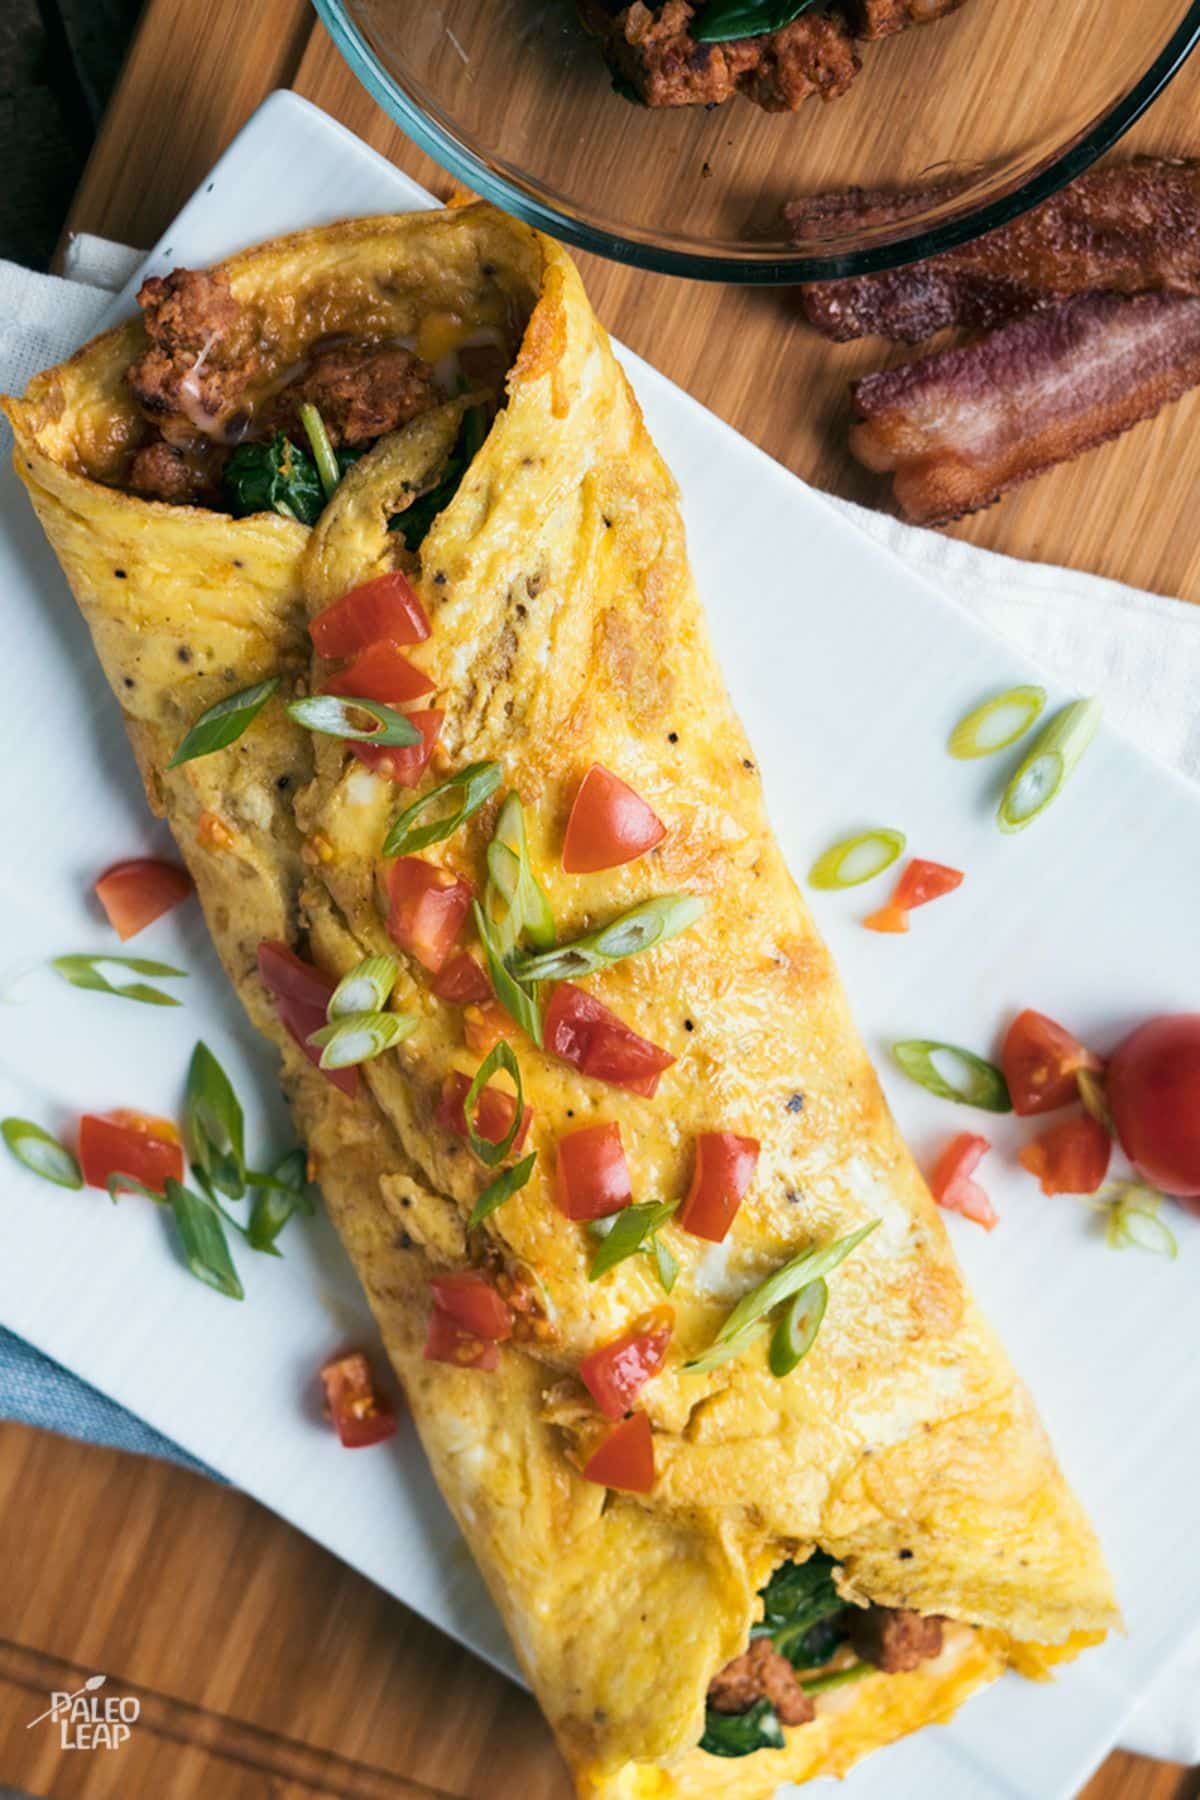 Chorizo And Spinach Omelette on a cloth napkin.